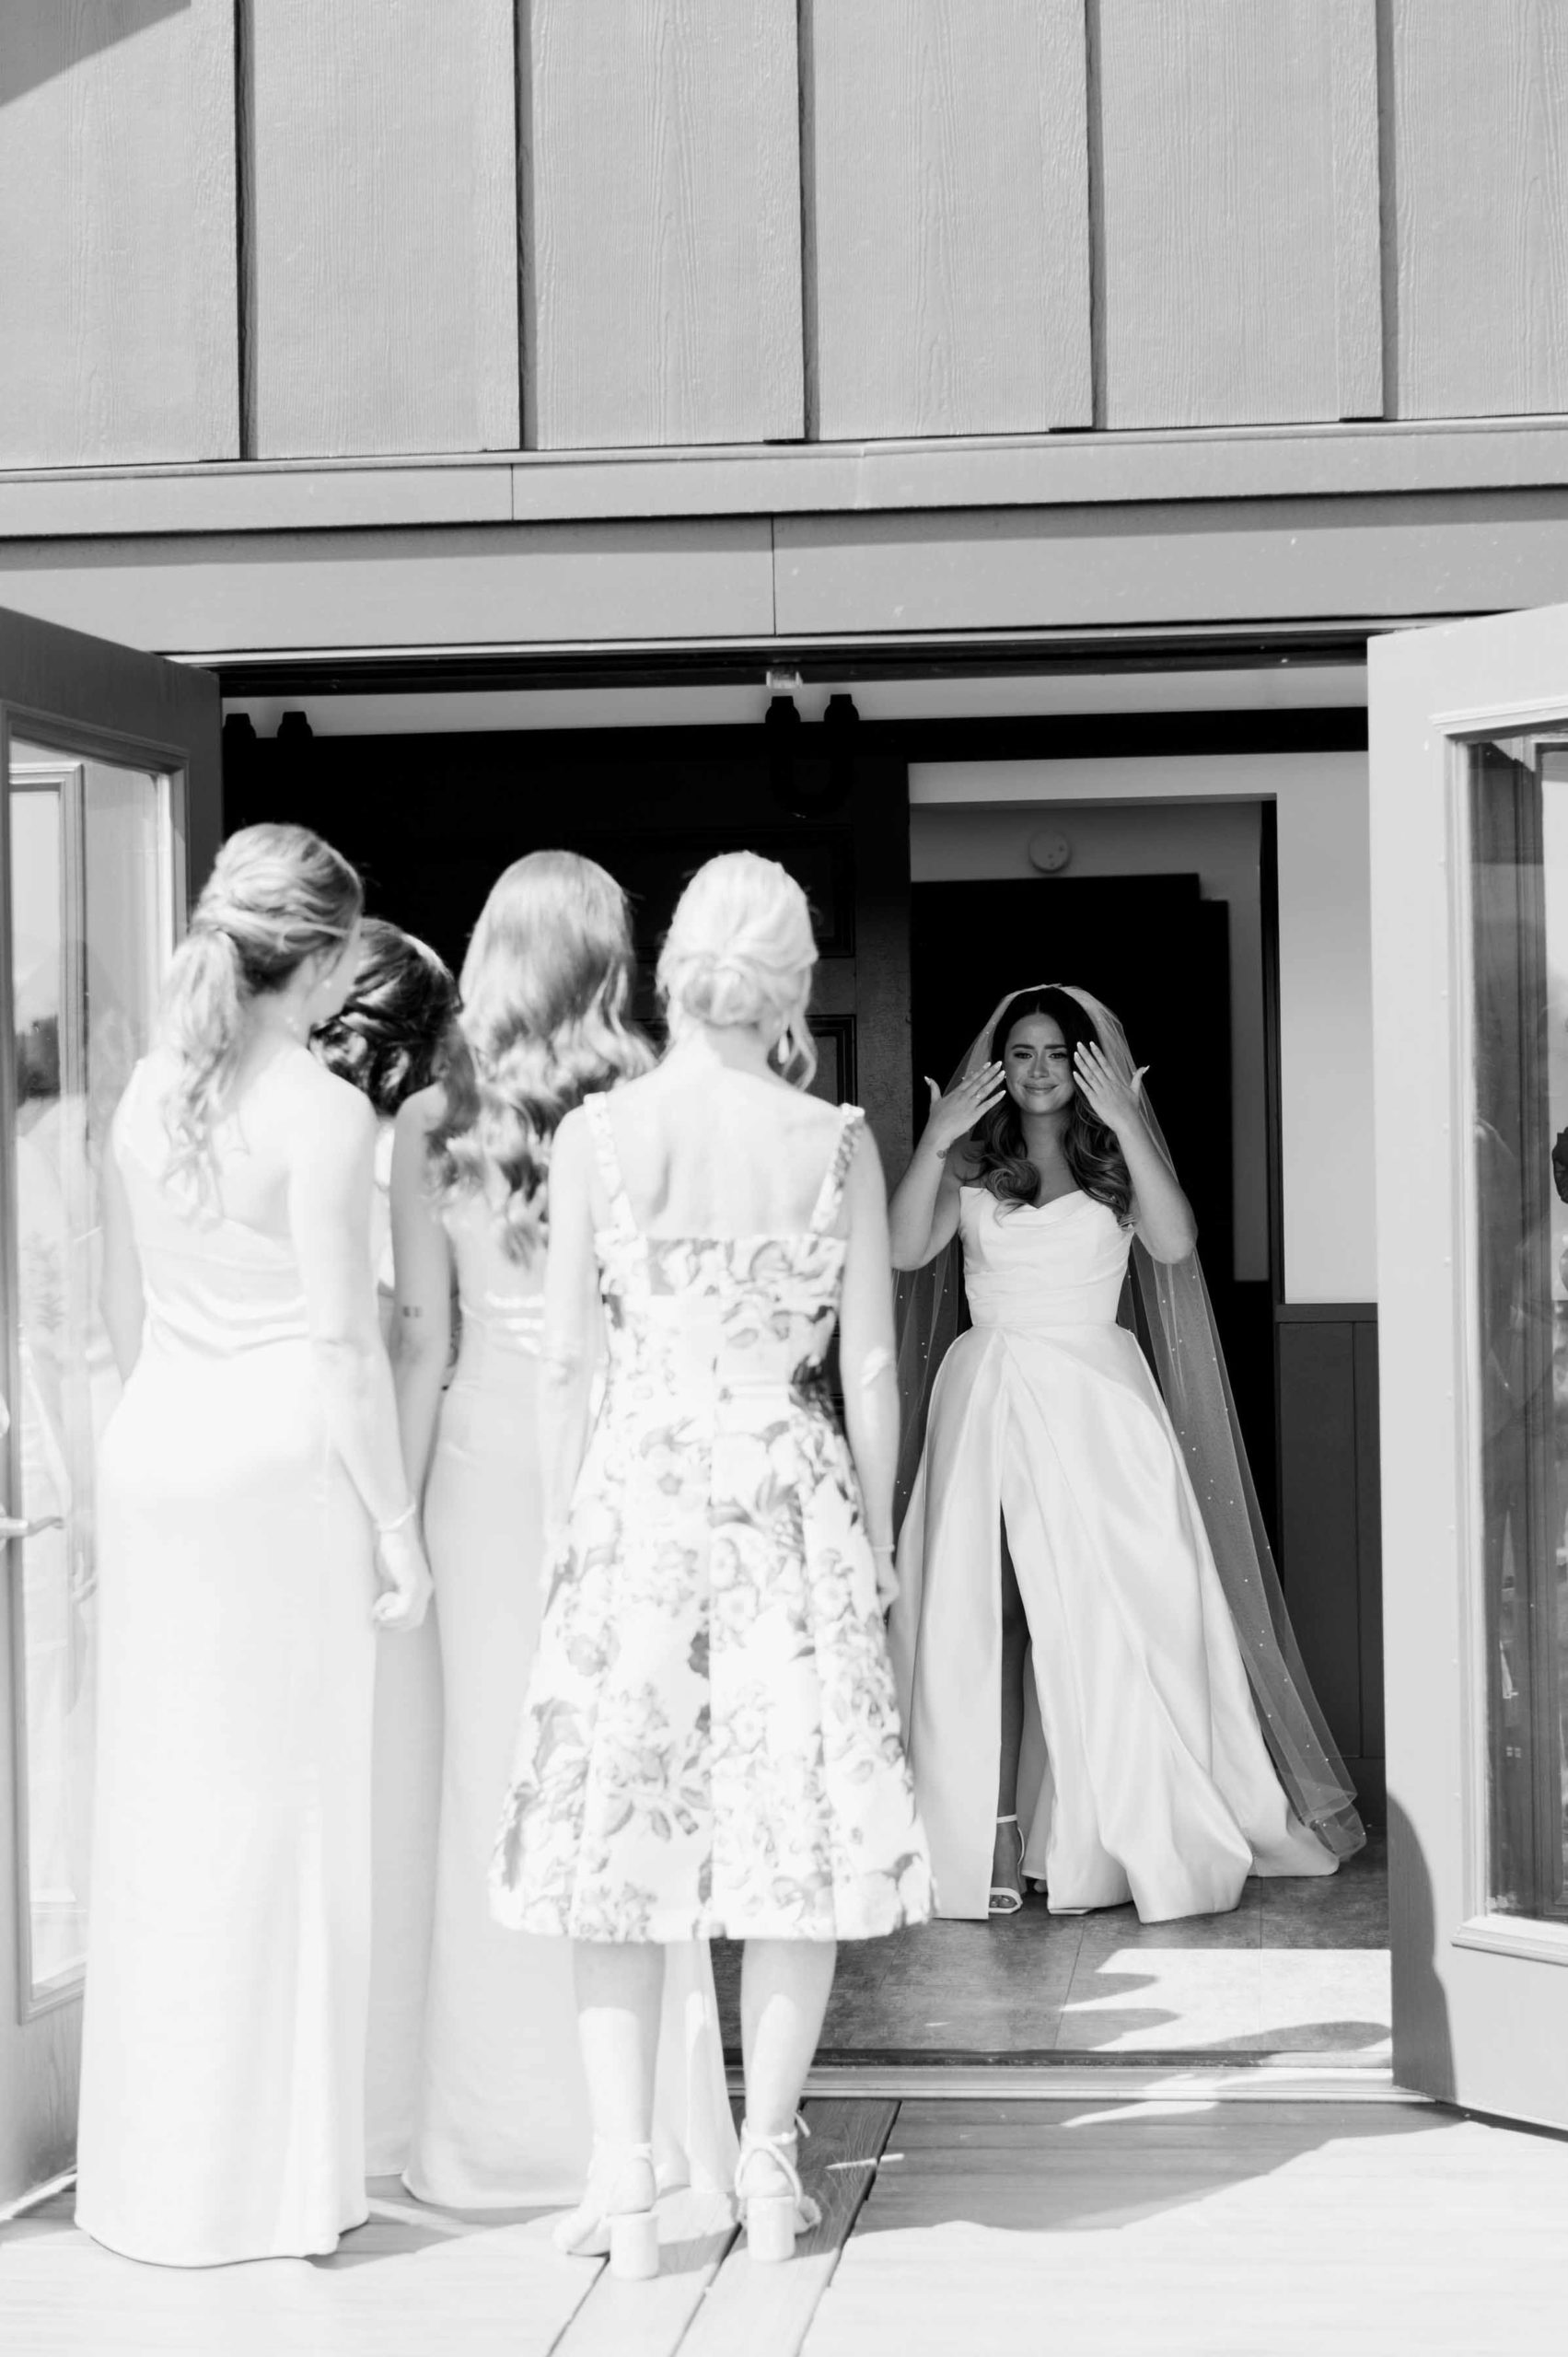 Hannah crying with her bridal party